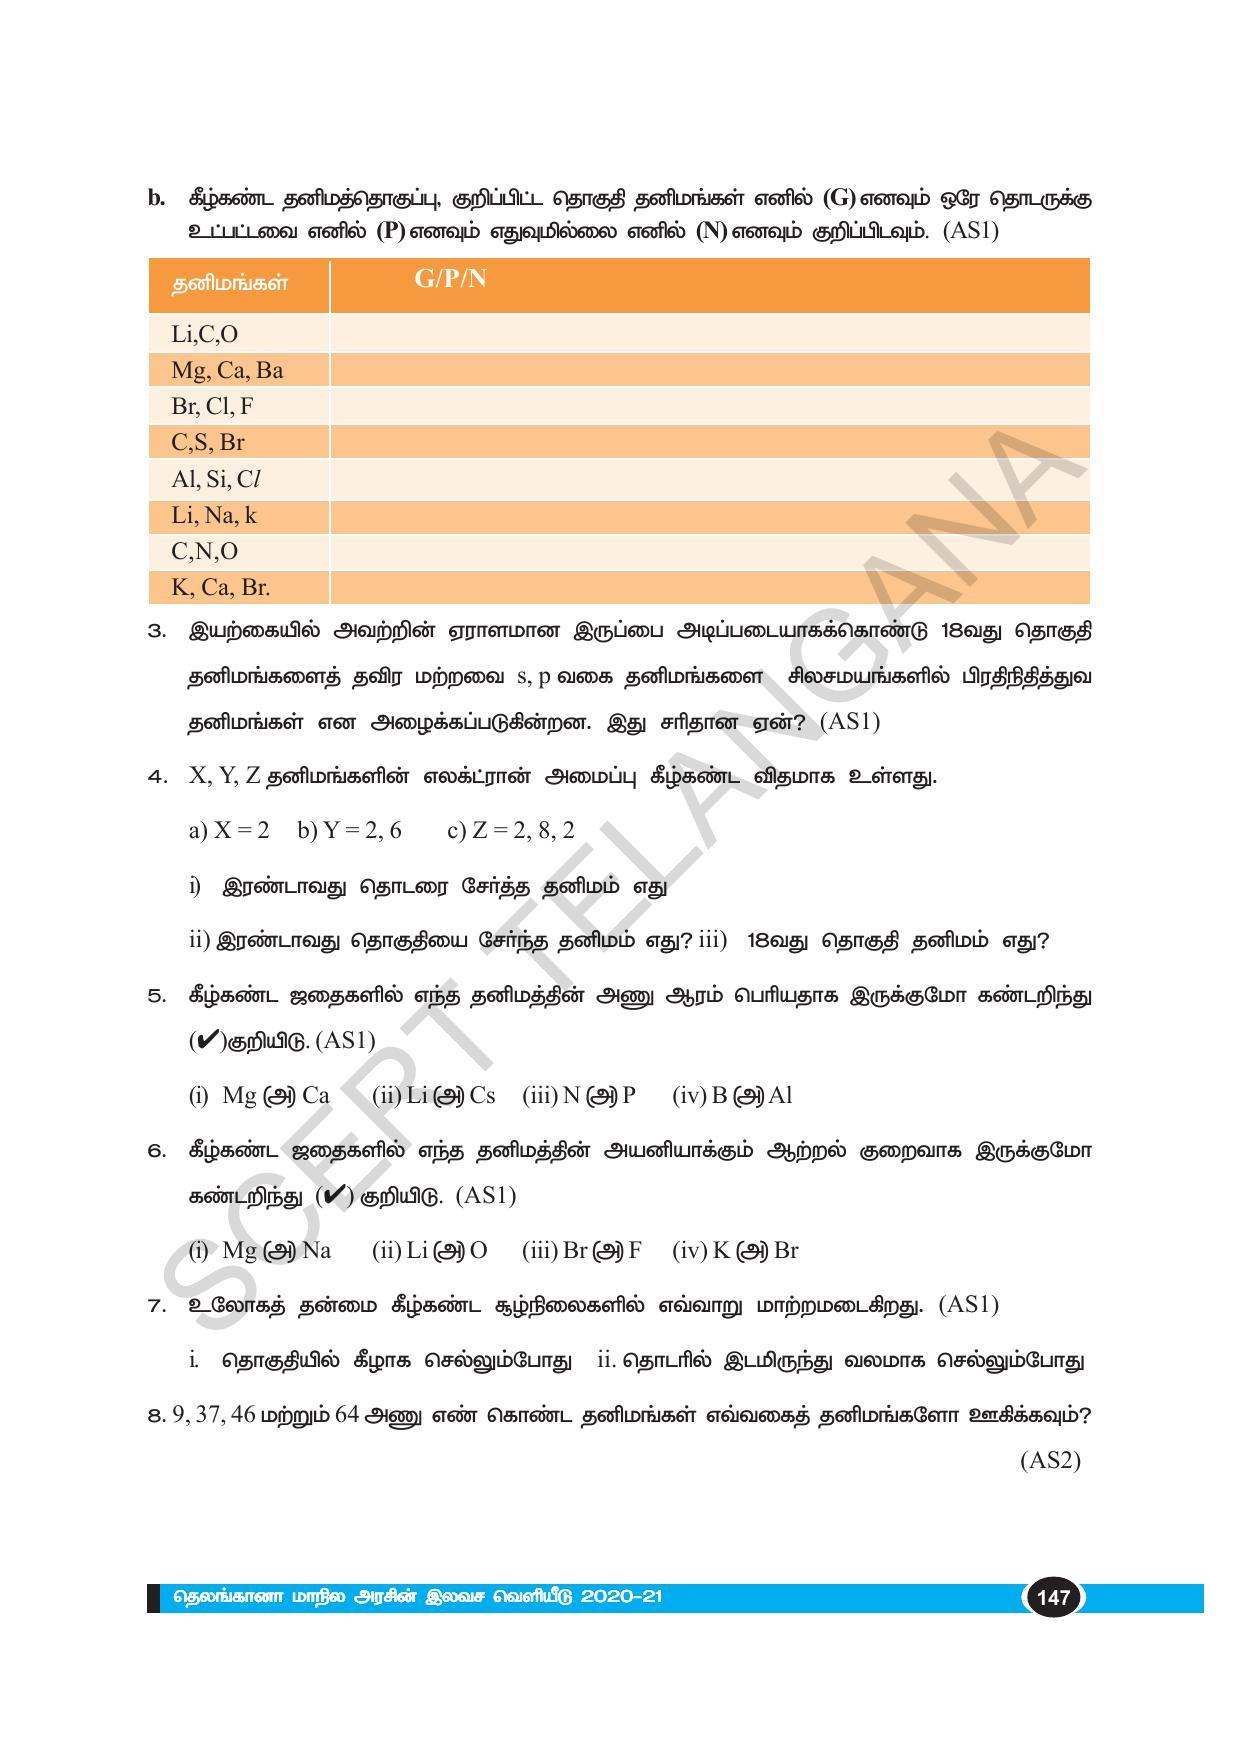 TS SCERT Class 10 Physical Science(Tamil Medium) Text Book - Page 159